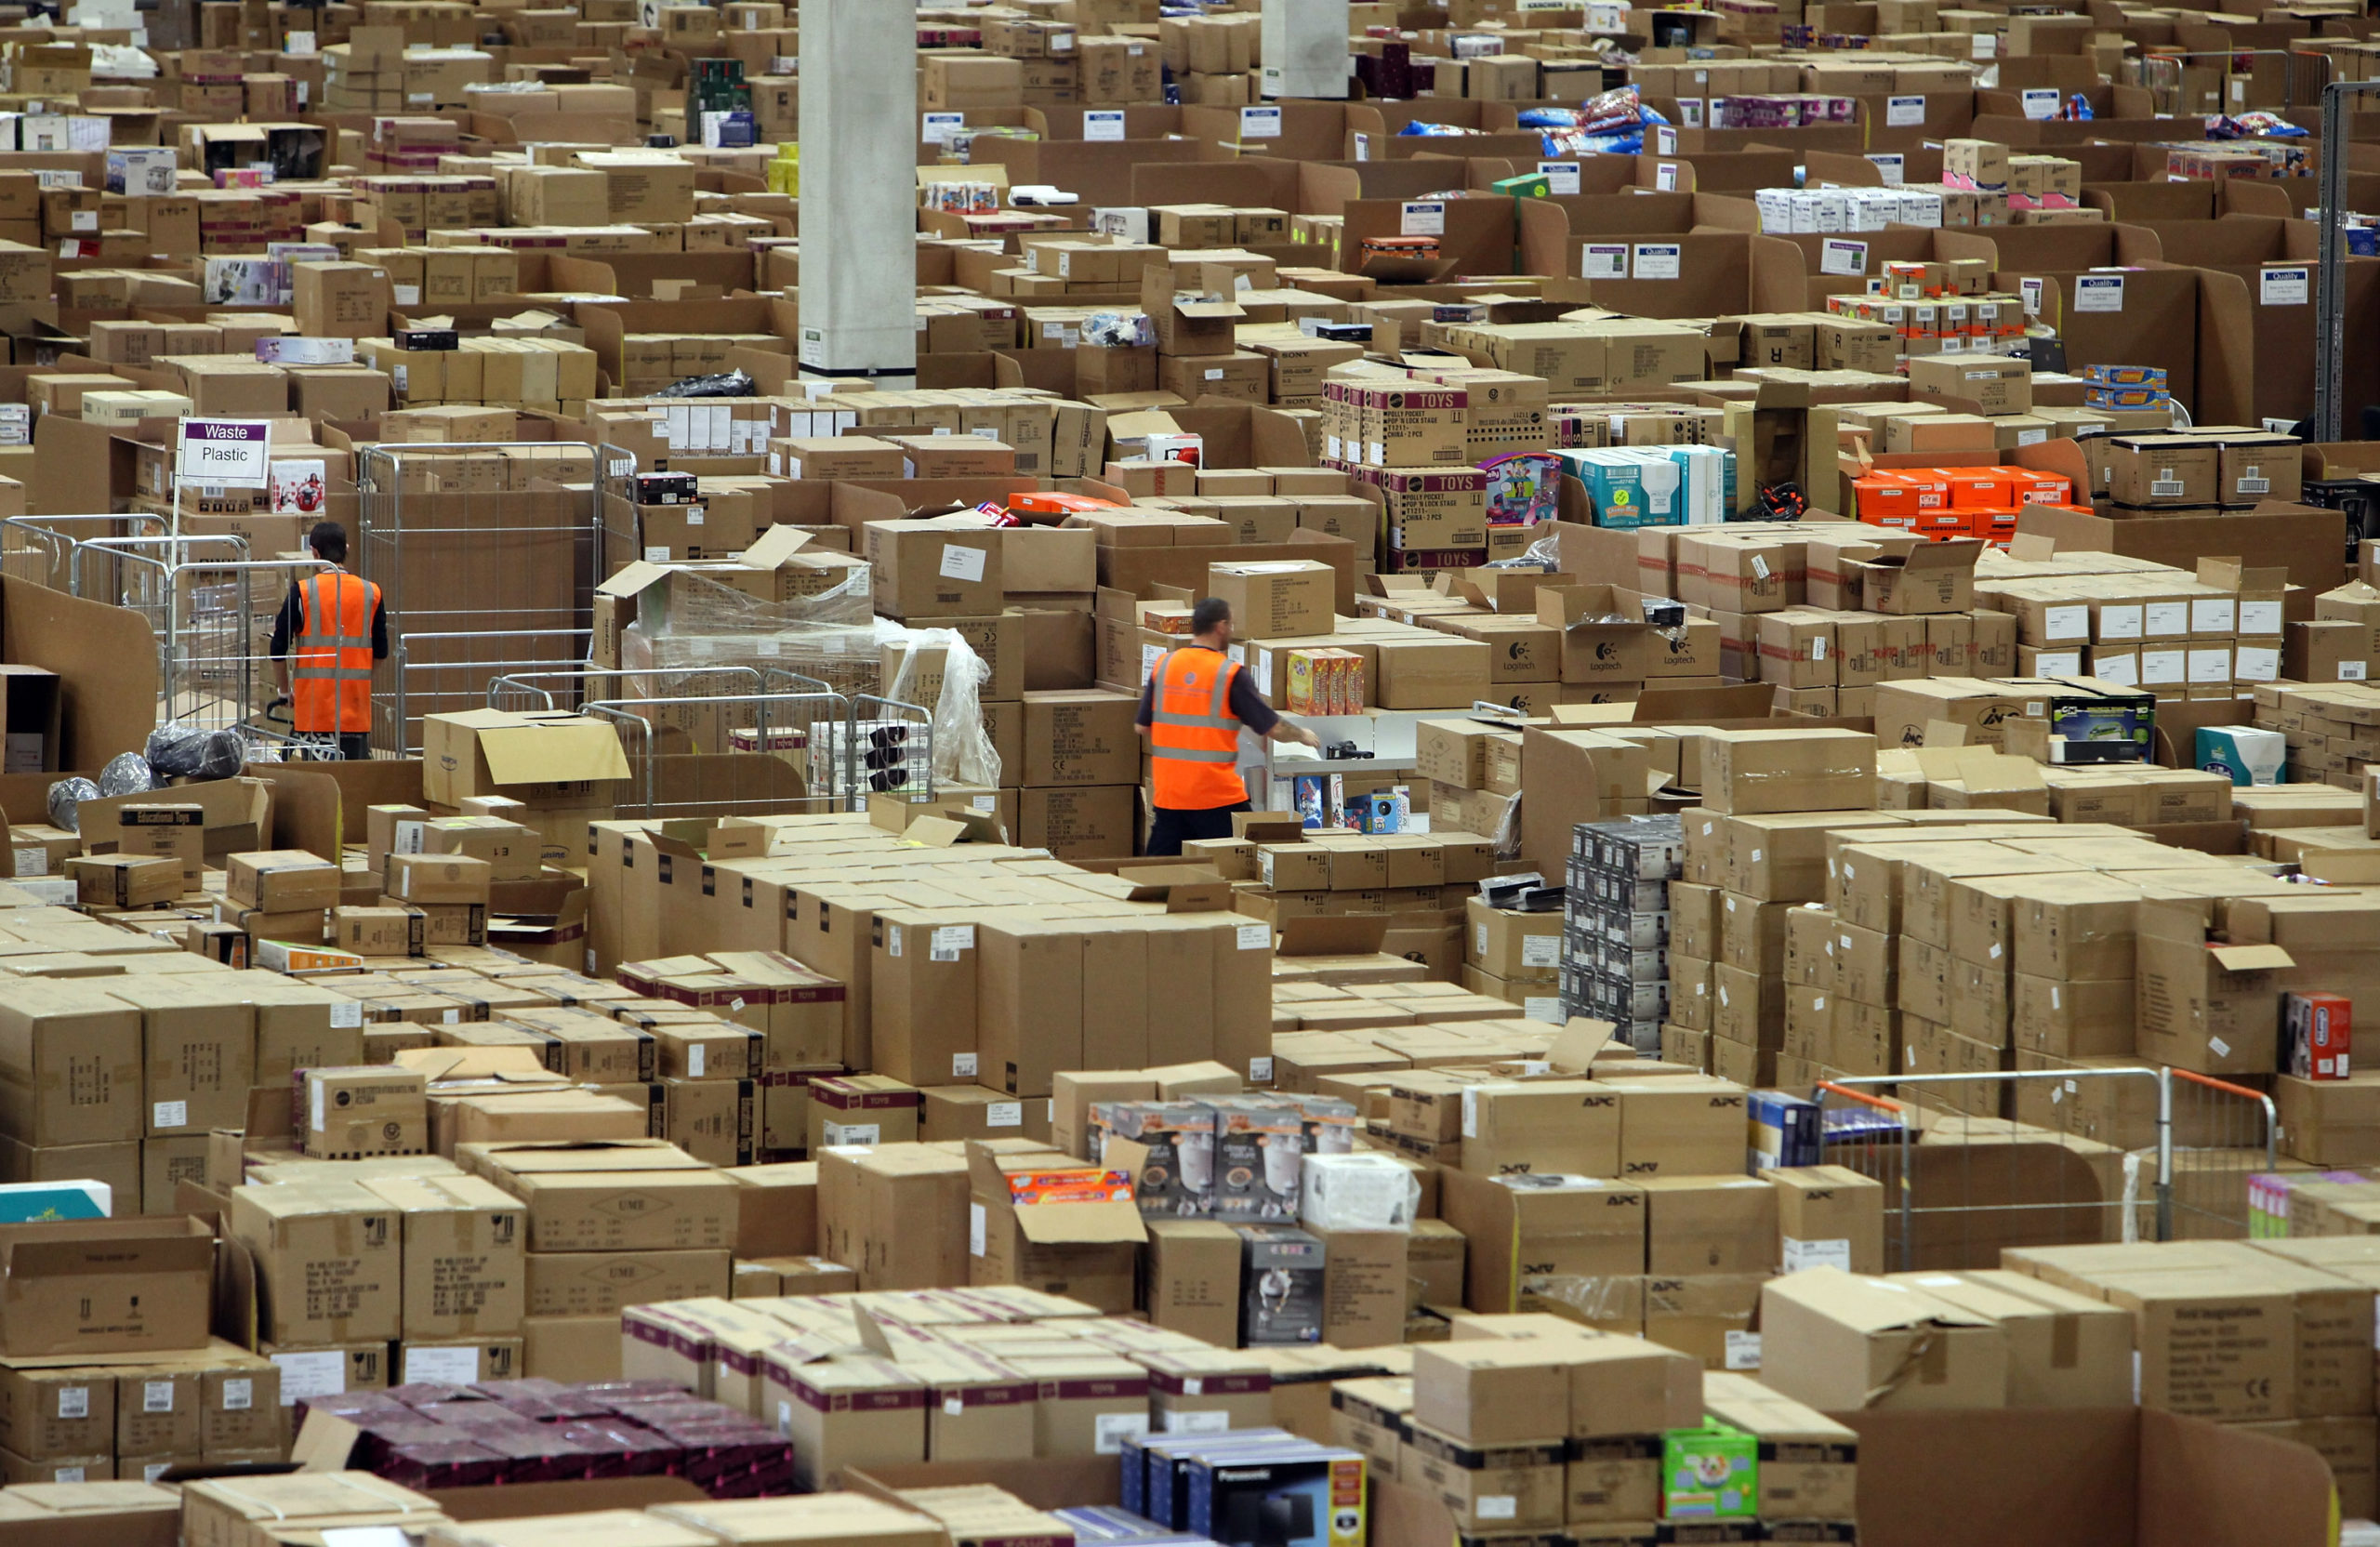 Staff at the Amazon Swansea fulfillment centre process orders as they prepare for what is expected to be their busiest Christmas on record on November 26, 2010 in Swansea, Wales. (Photo by Matt Cardy/Getty Images)